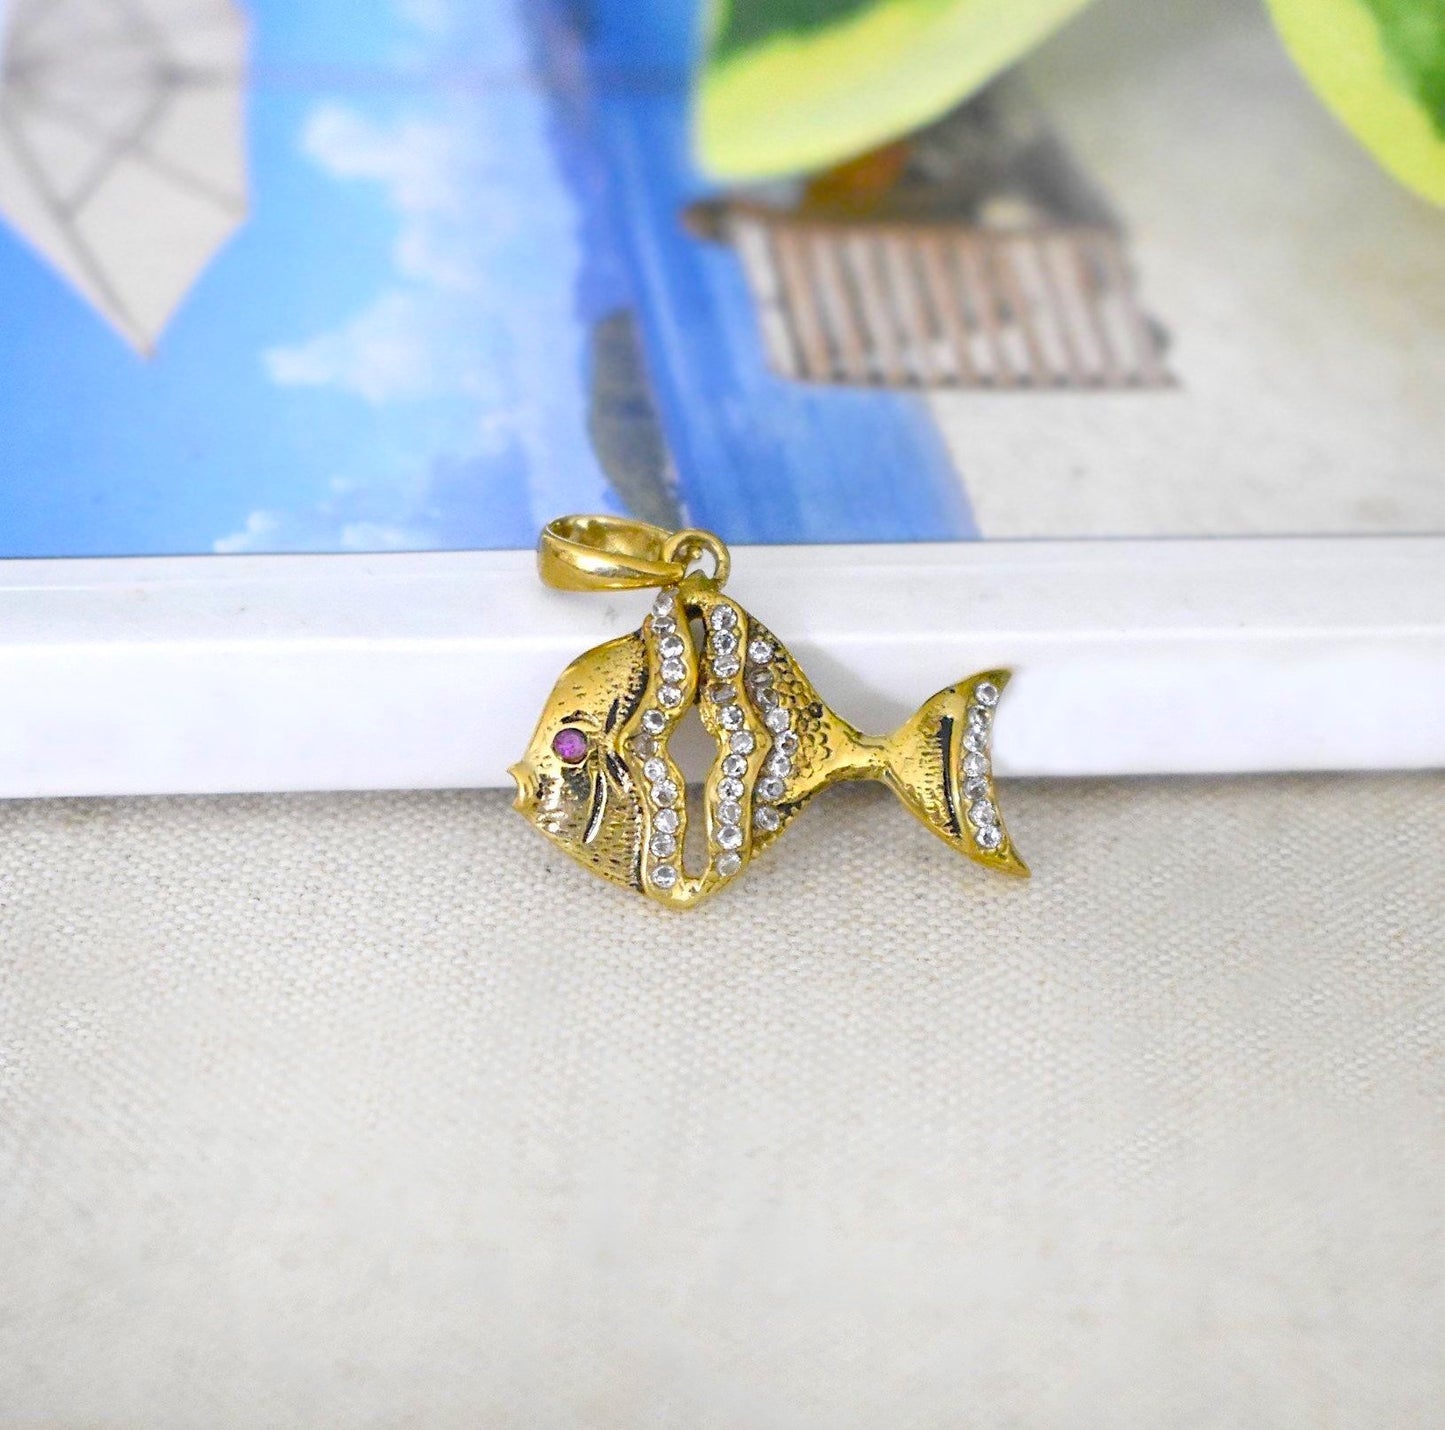 Gold Fish Handmade Gold Brass Charm Necklace Pendant Jewelry